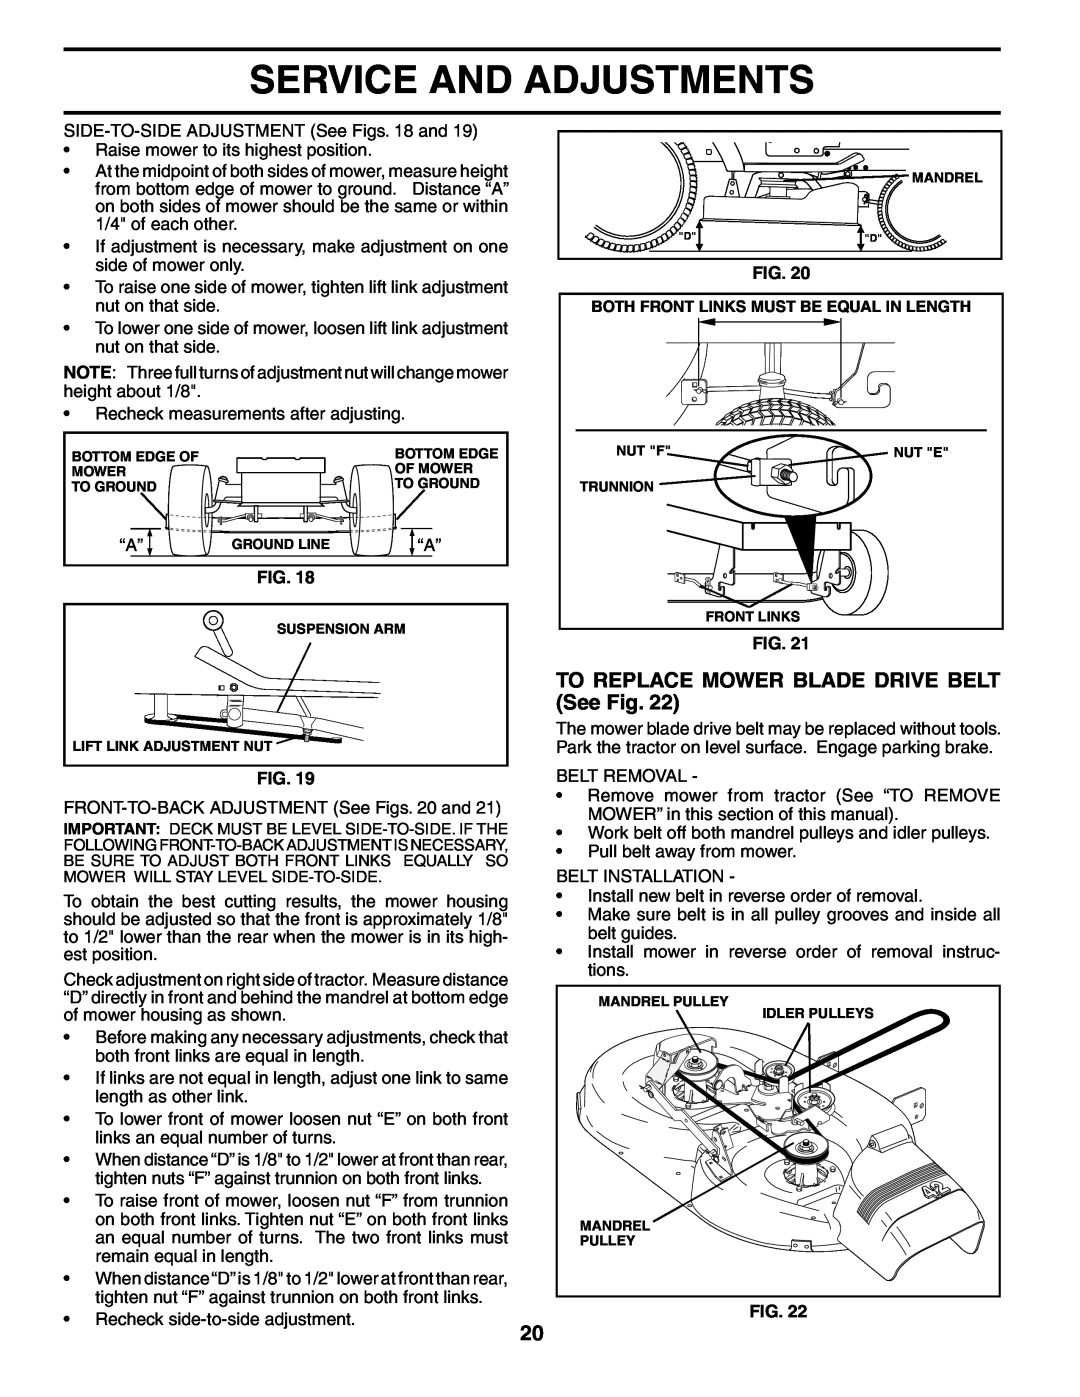 Poulan 195021 manual TO REPLACE MOWER BLADE DRIVE BELT See Fig, Service And Adjustments 